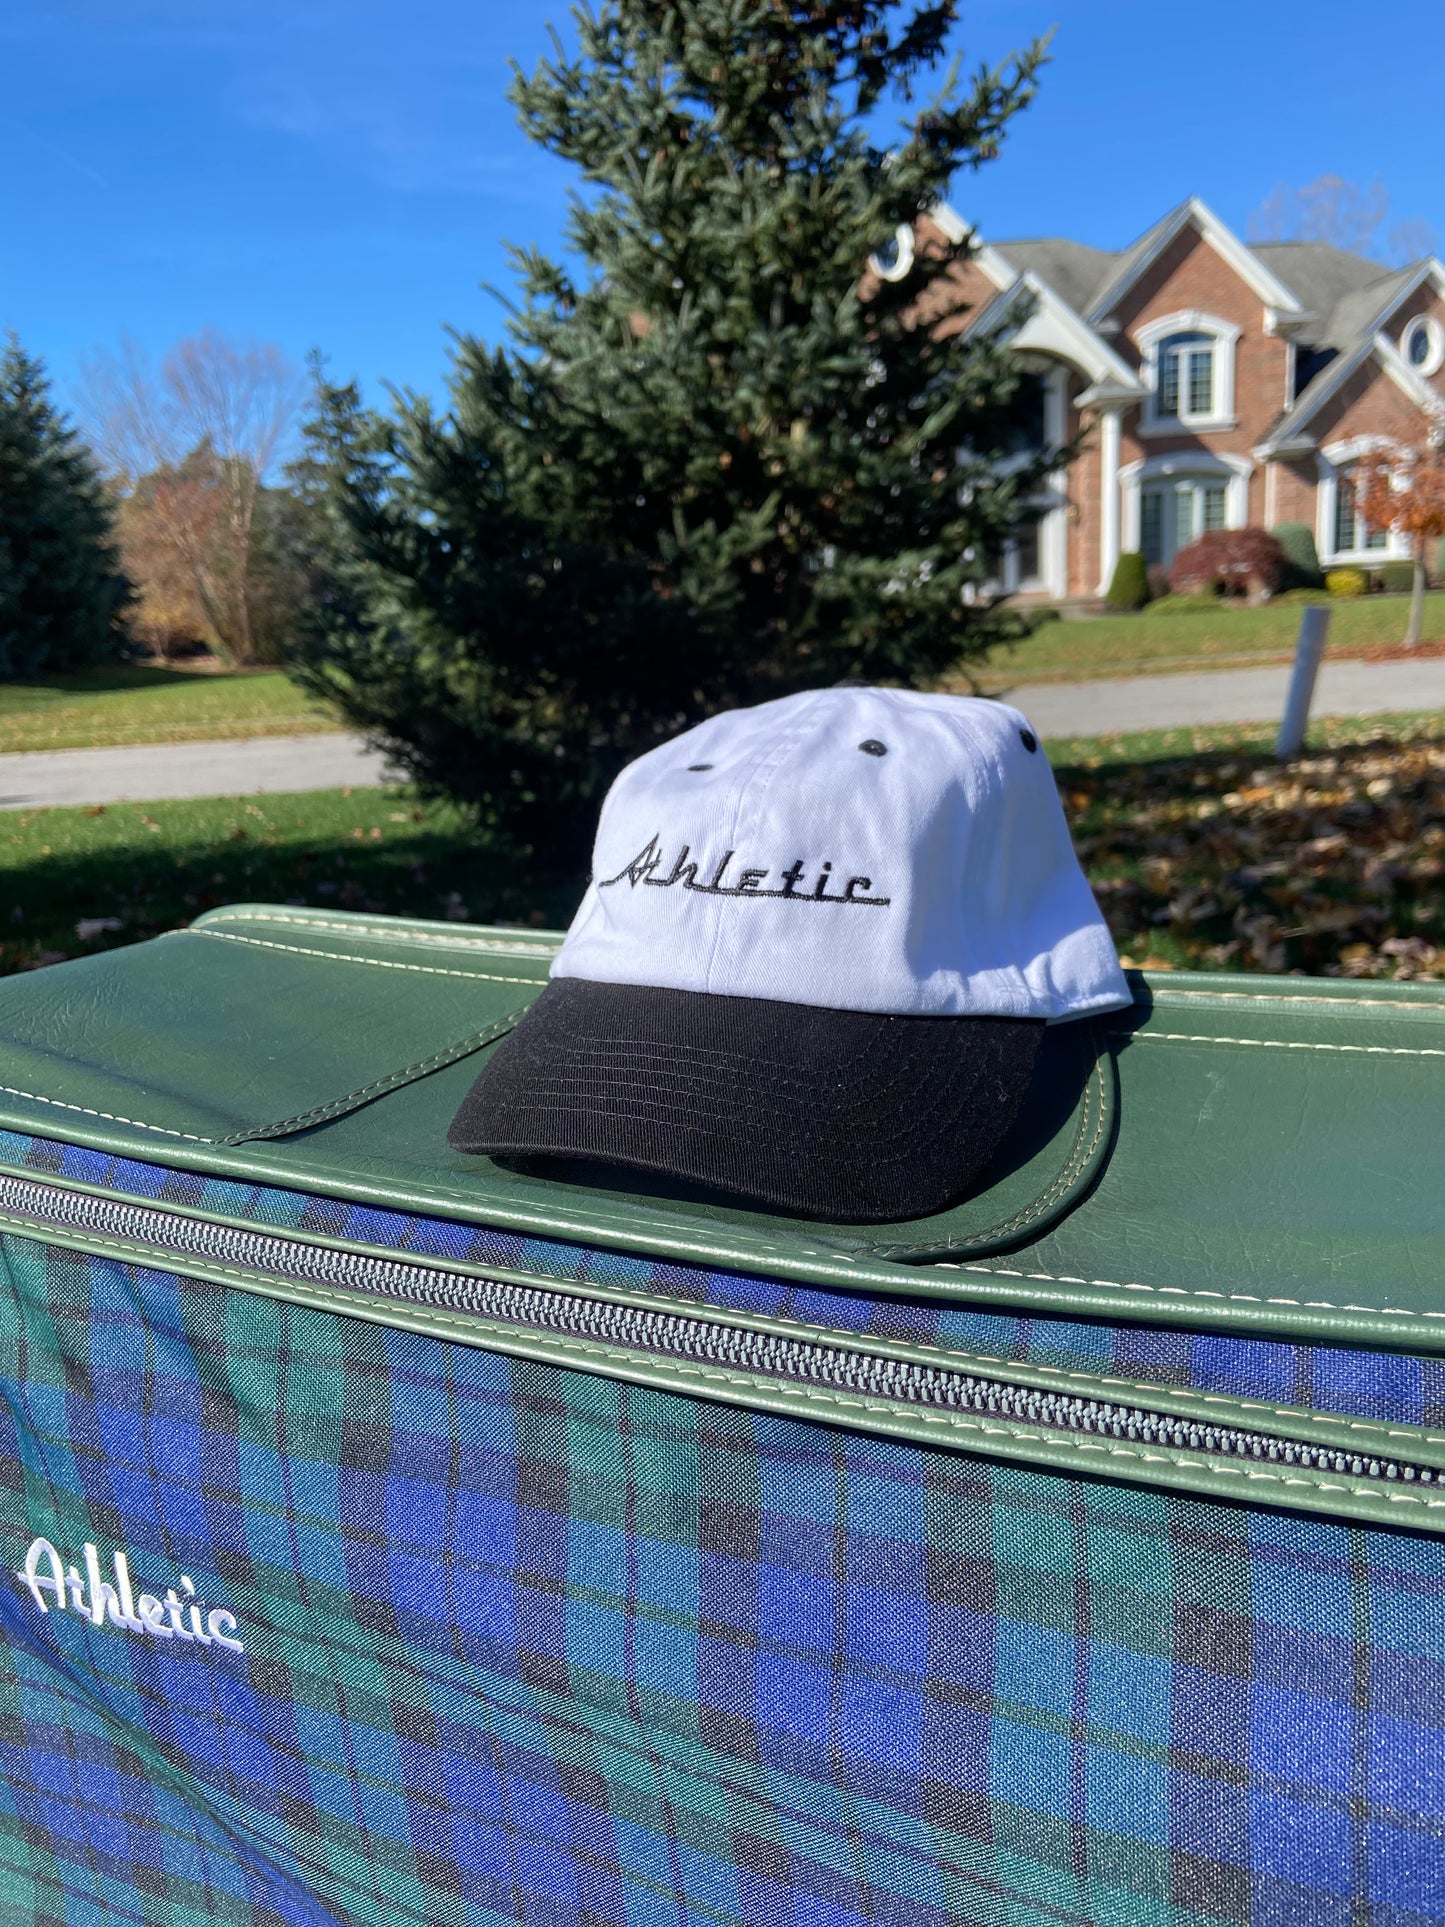 Vintage style white hat with a black brim. Athletic and Affluent calls this colorway "tire black" and the AA club showcases their racing logo in a tire black font as well, reading "Athletic". It sits atop an AA Club embroidered vintage leather plaid luggage set in front of a pile of fall leaves.